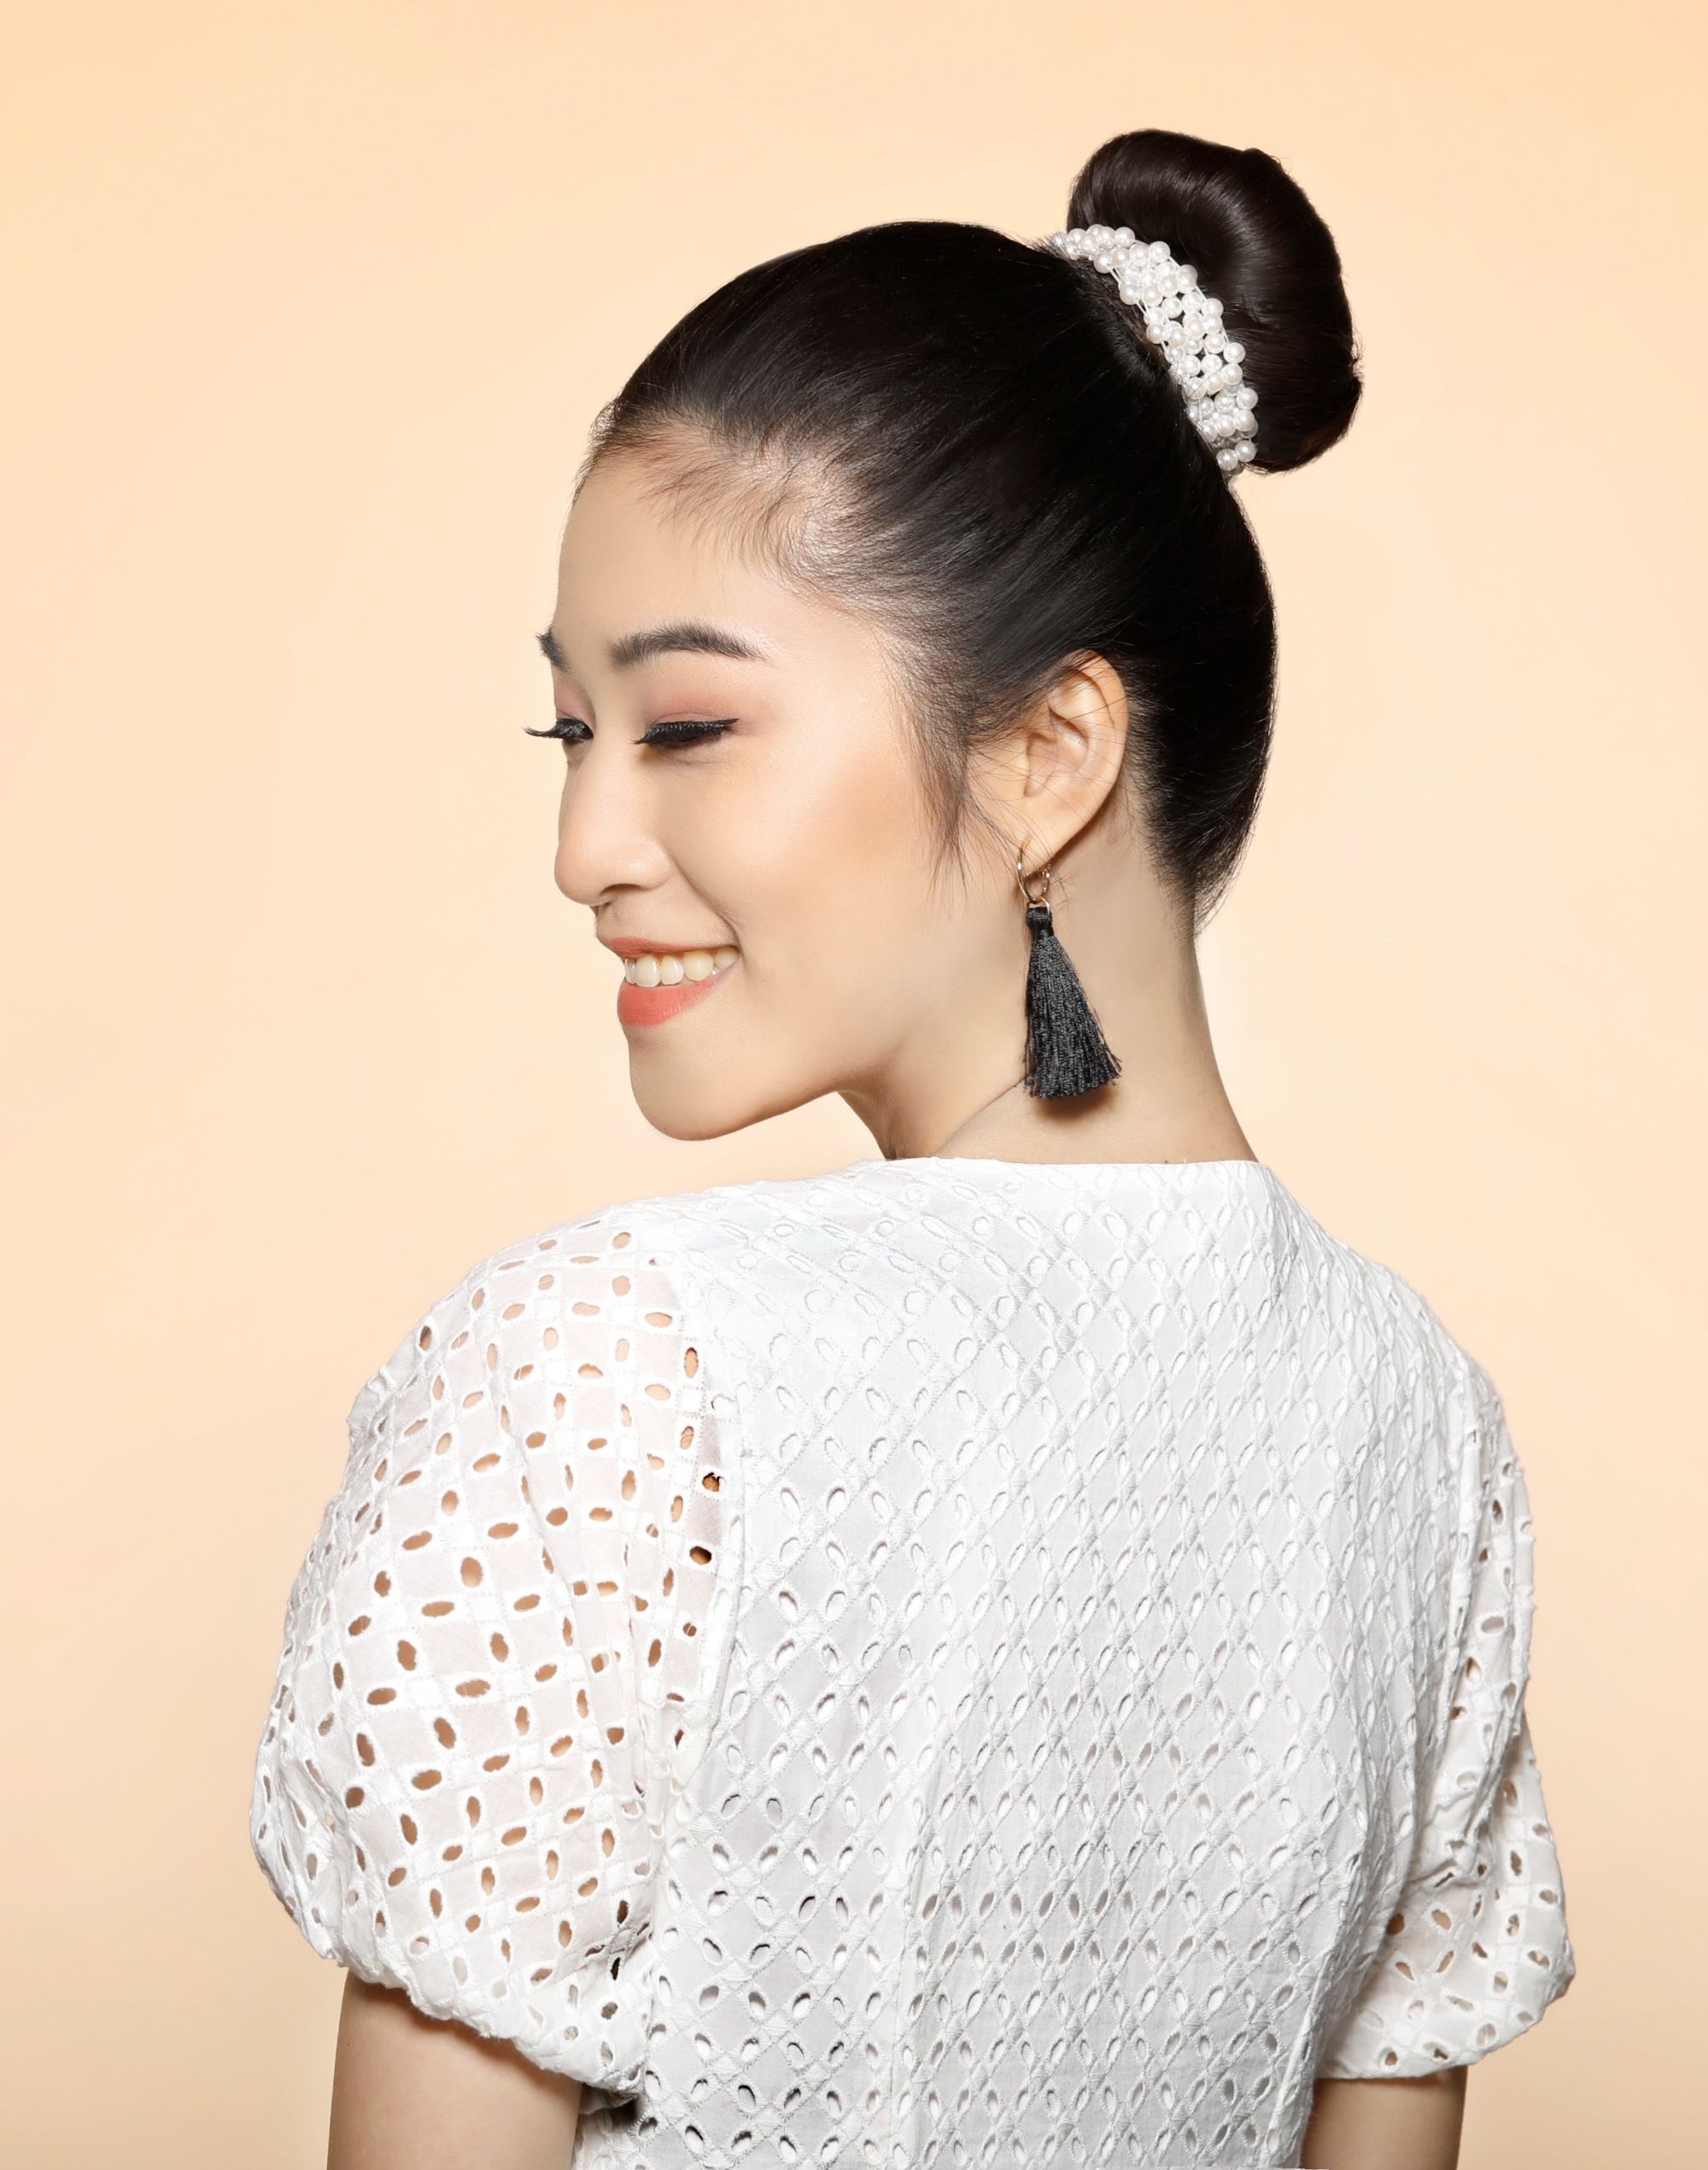 Asian woman with a top bun hairstyle wearing a white dress and black dangling earrings